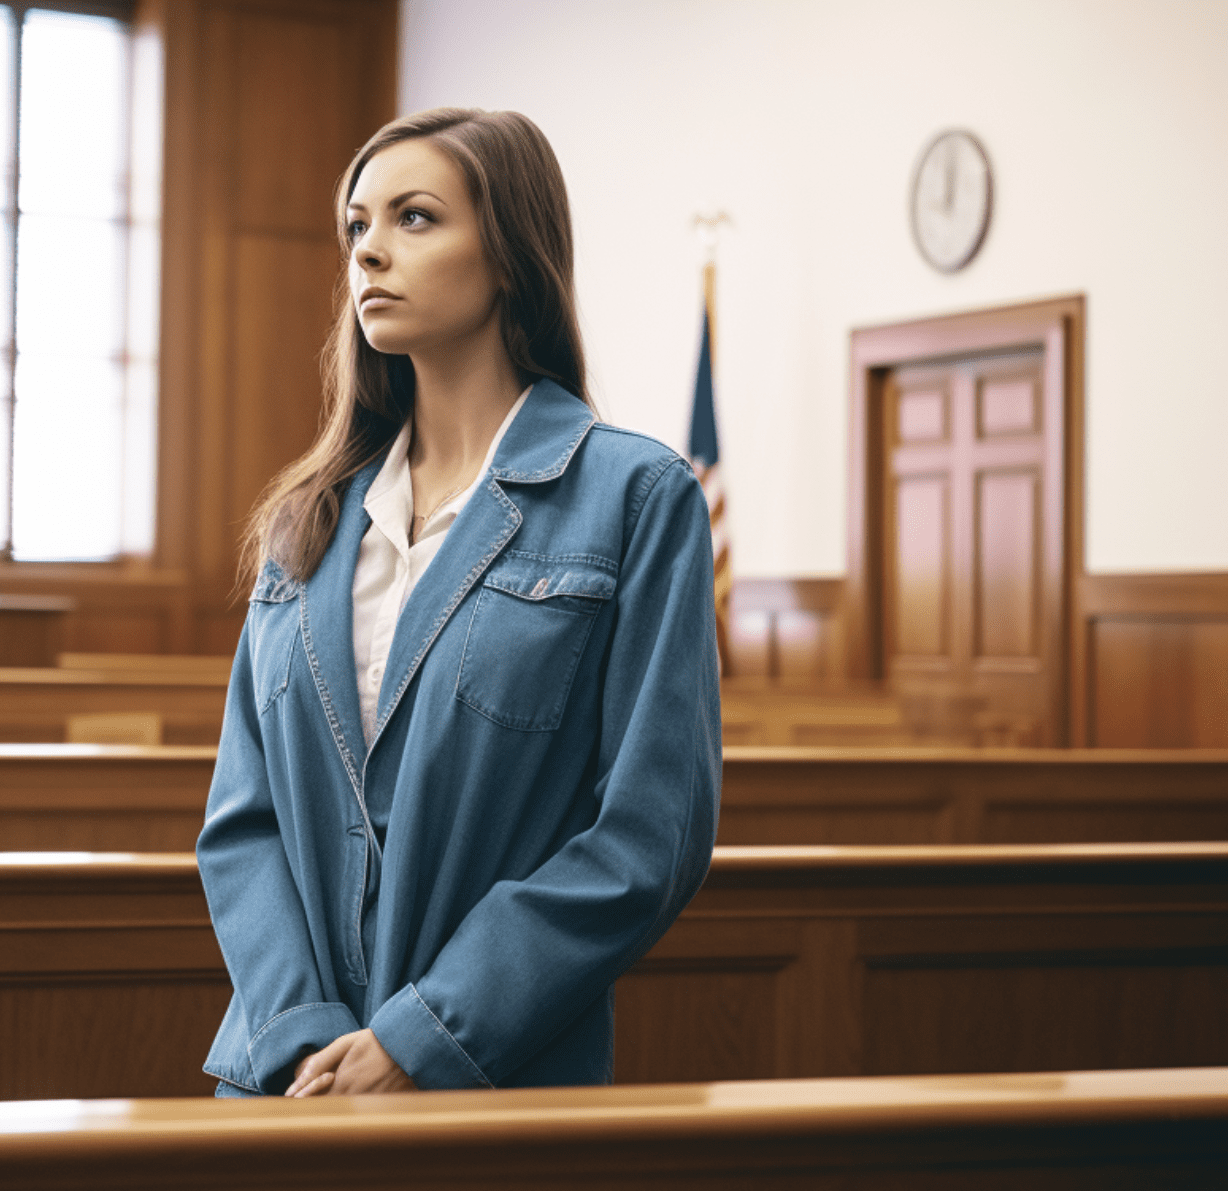 A woman standing in a courtroom